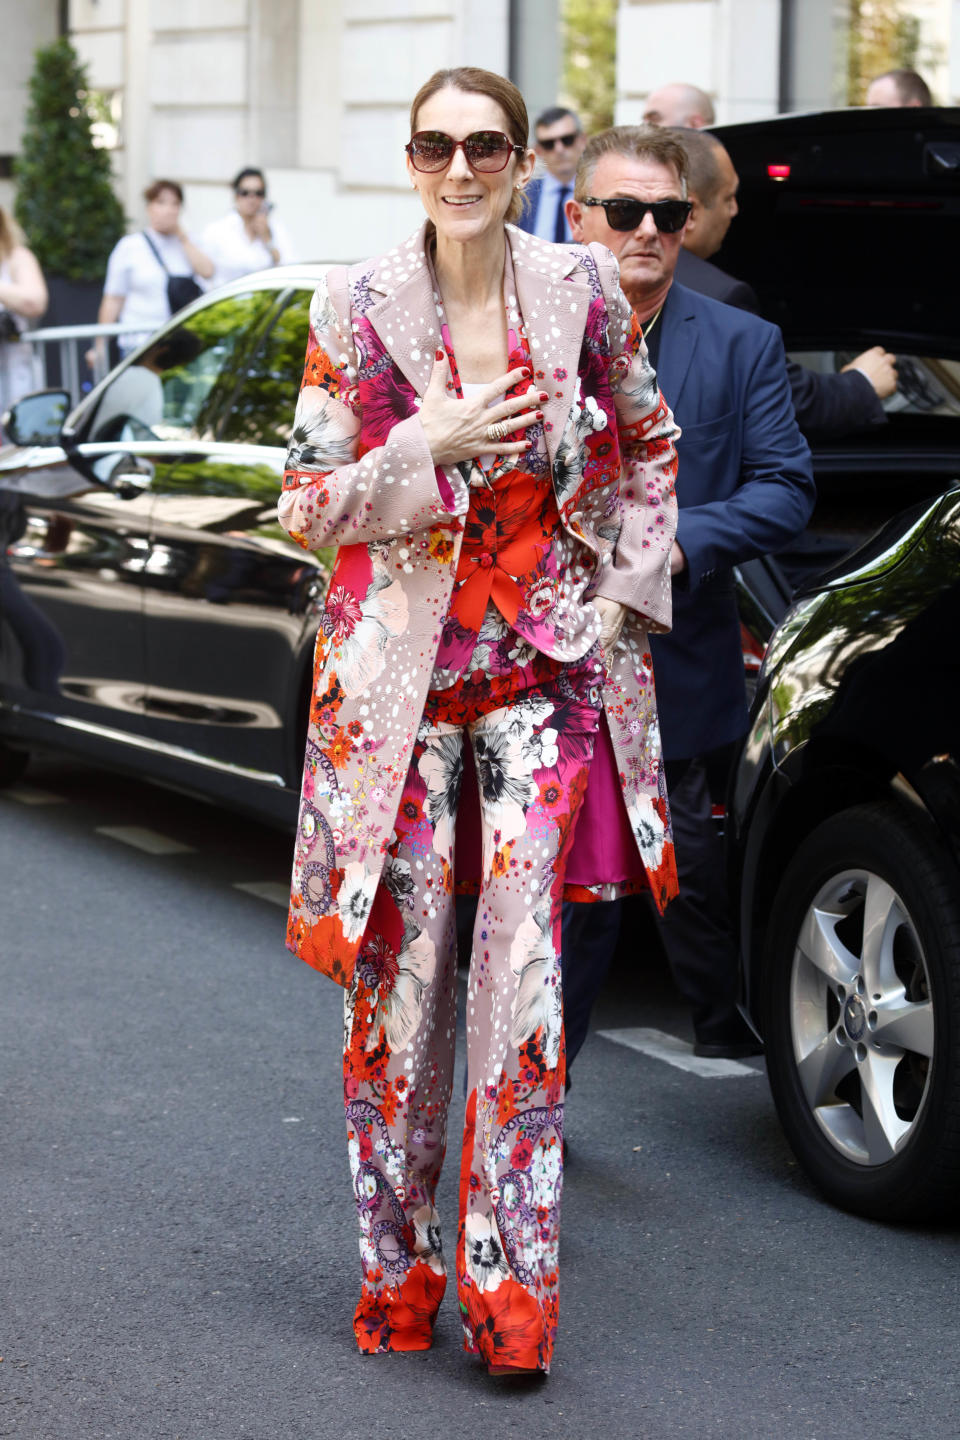 The Canadian star brought out all the florals when she left her Paris hotel on June 14, 2017 wearing a Roberto Cavalli suit. (Photo by Mehdi Taamallah/NurPhoto via Getty Images)